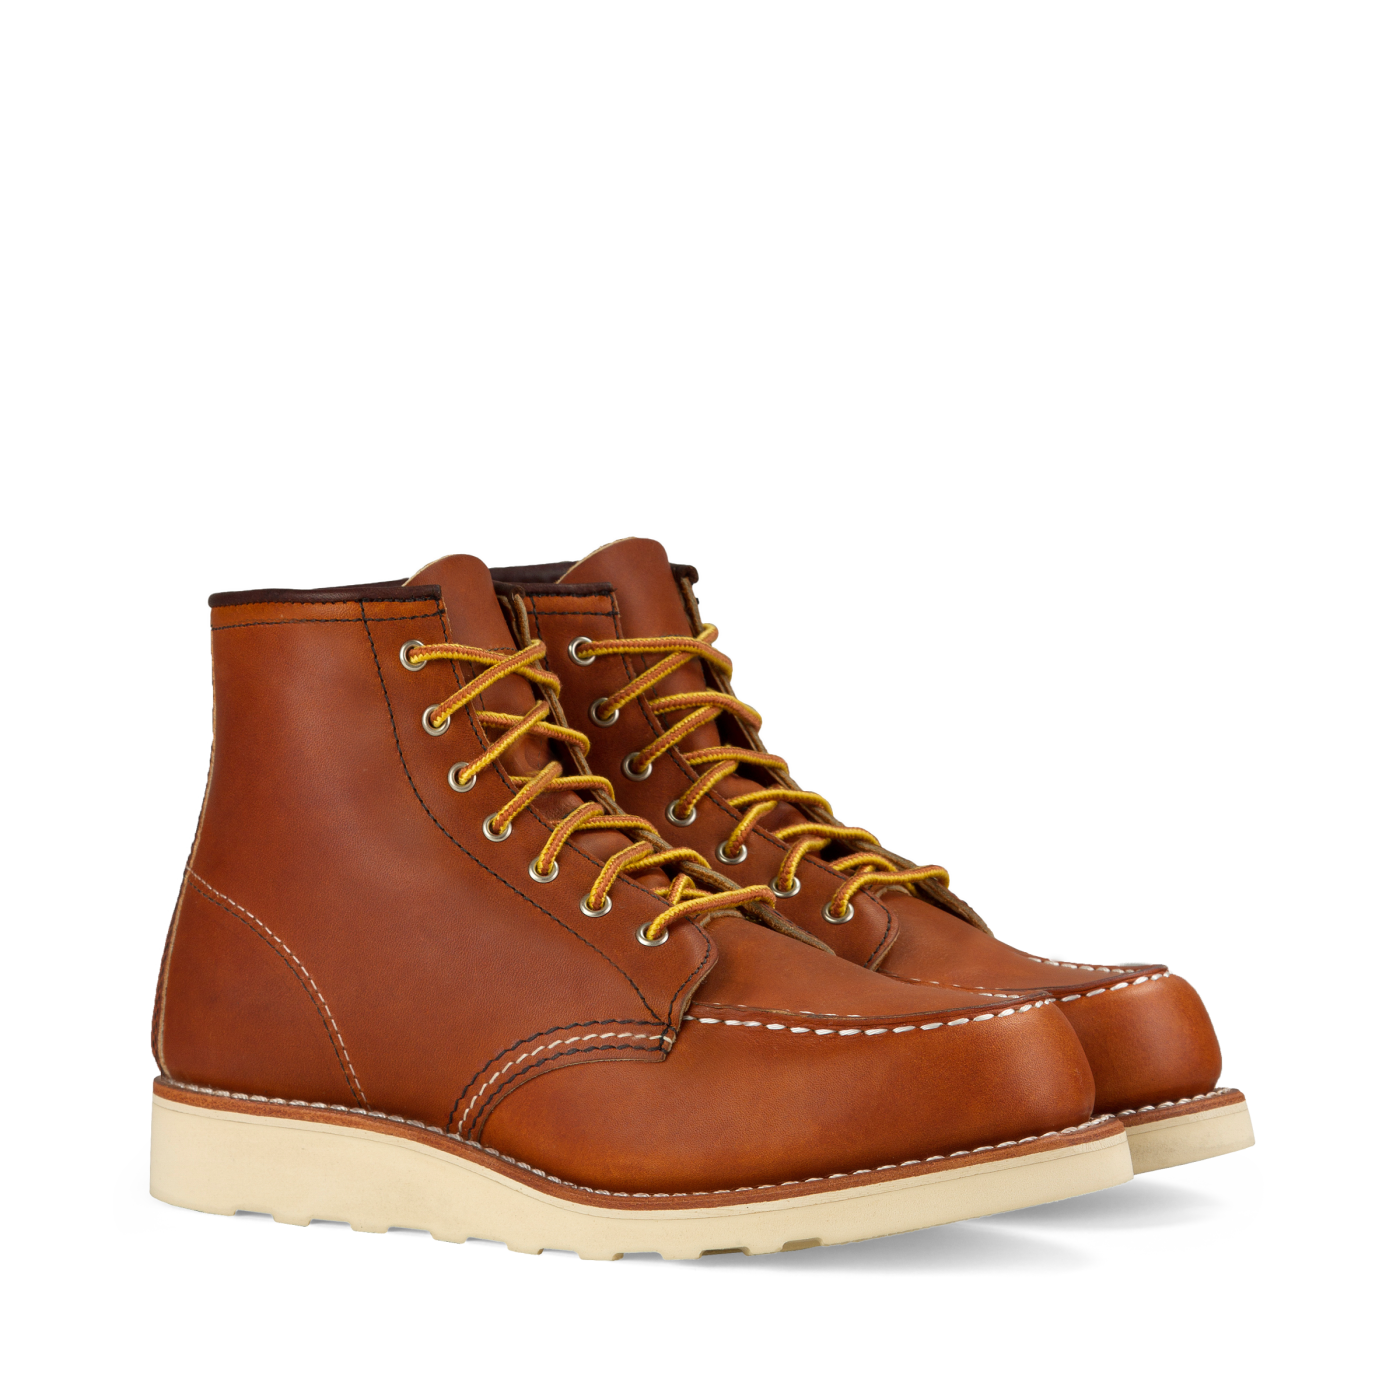 Moc Toe Work Boots - Red Wing London